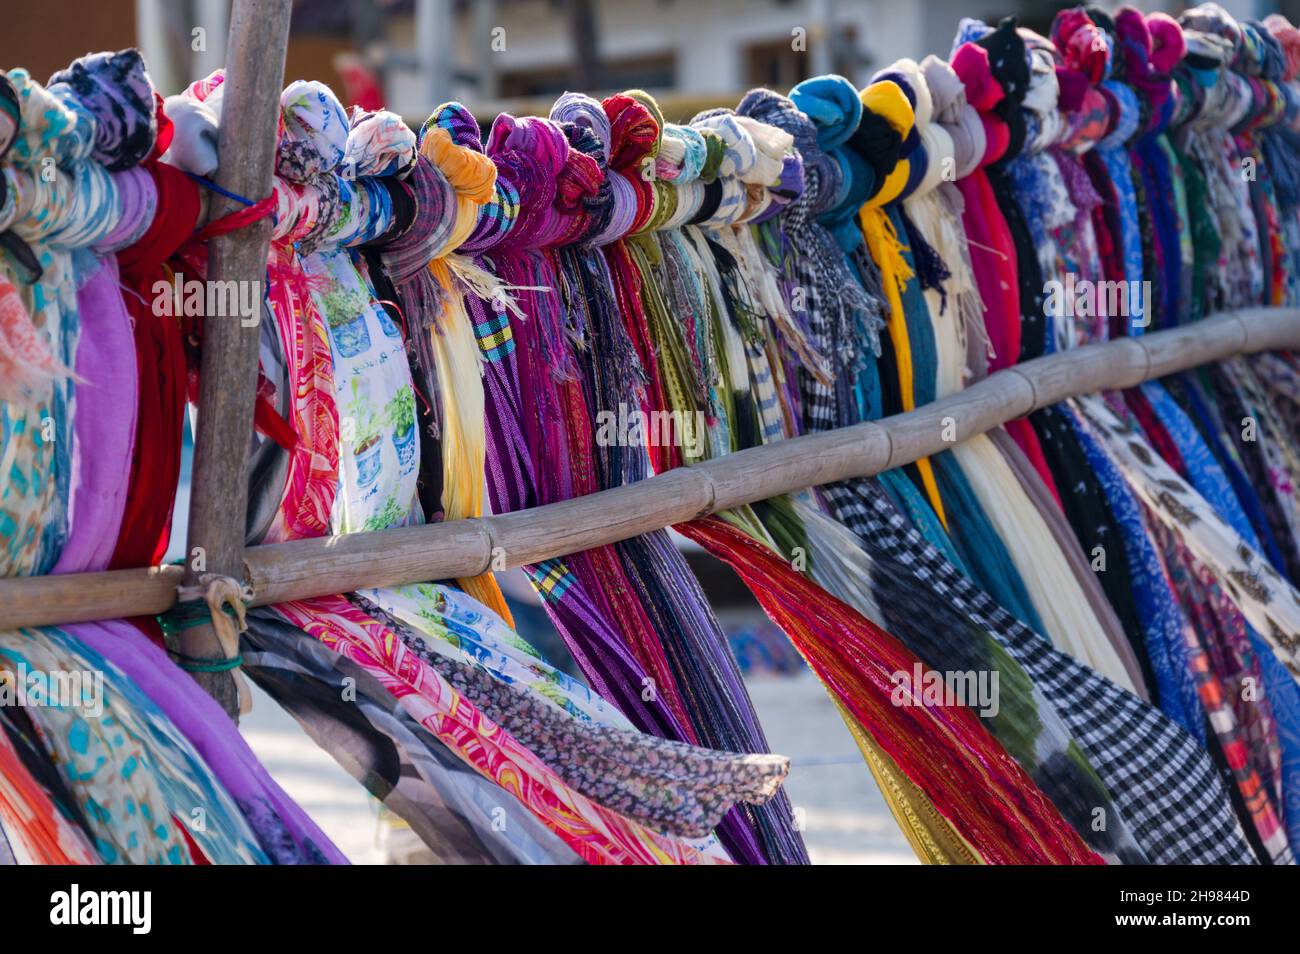 Colourful traditional fabric garments on display for sale on beach, Diani, Kenya Stock Photo